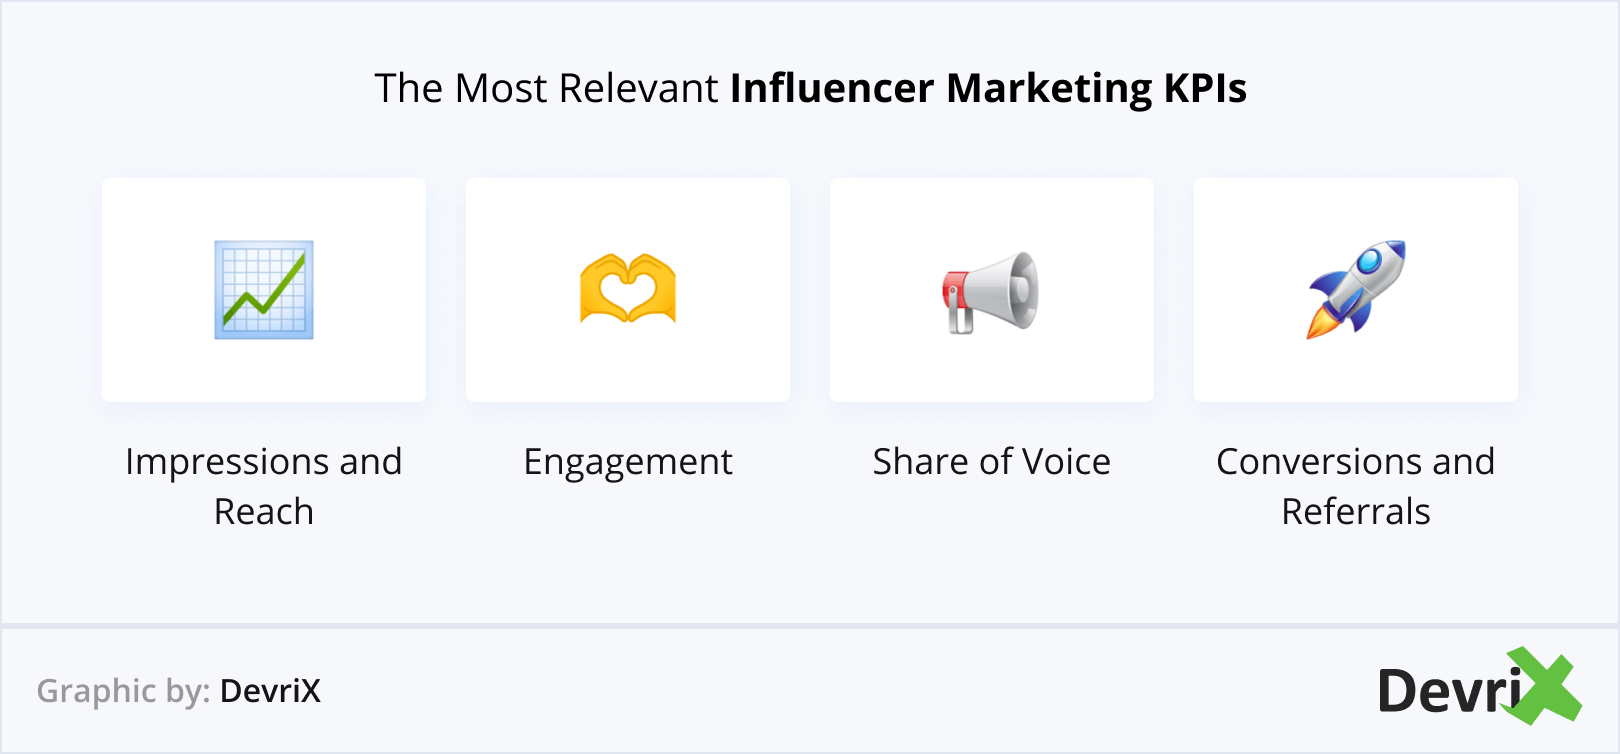 The Most Relevant Influencer Marketing KPIs